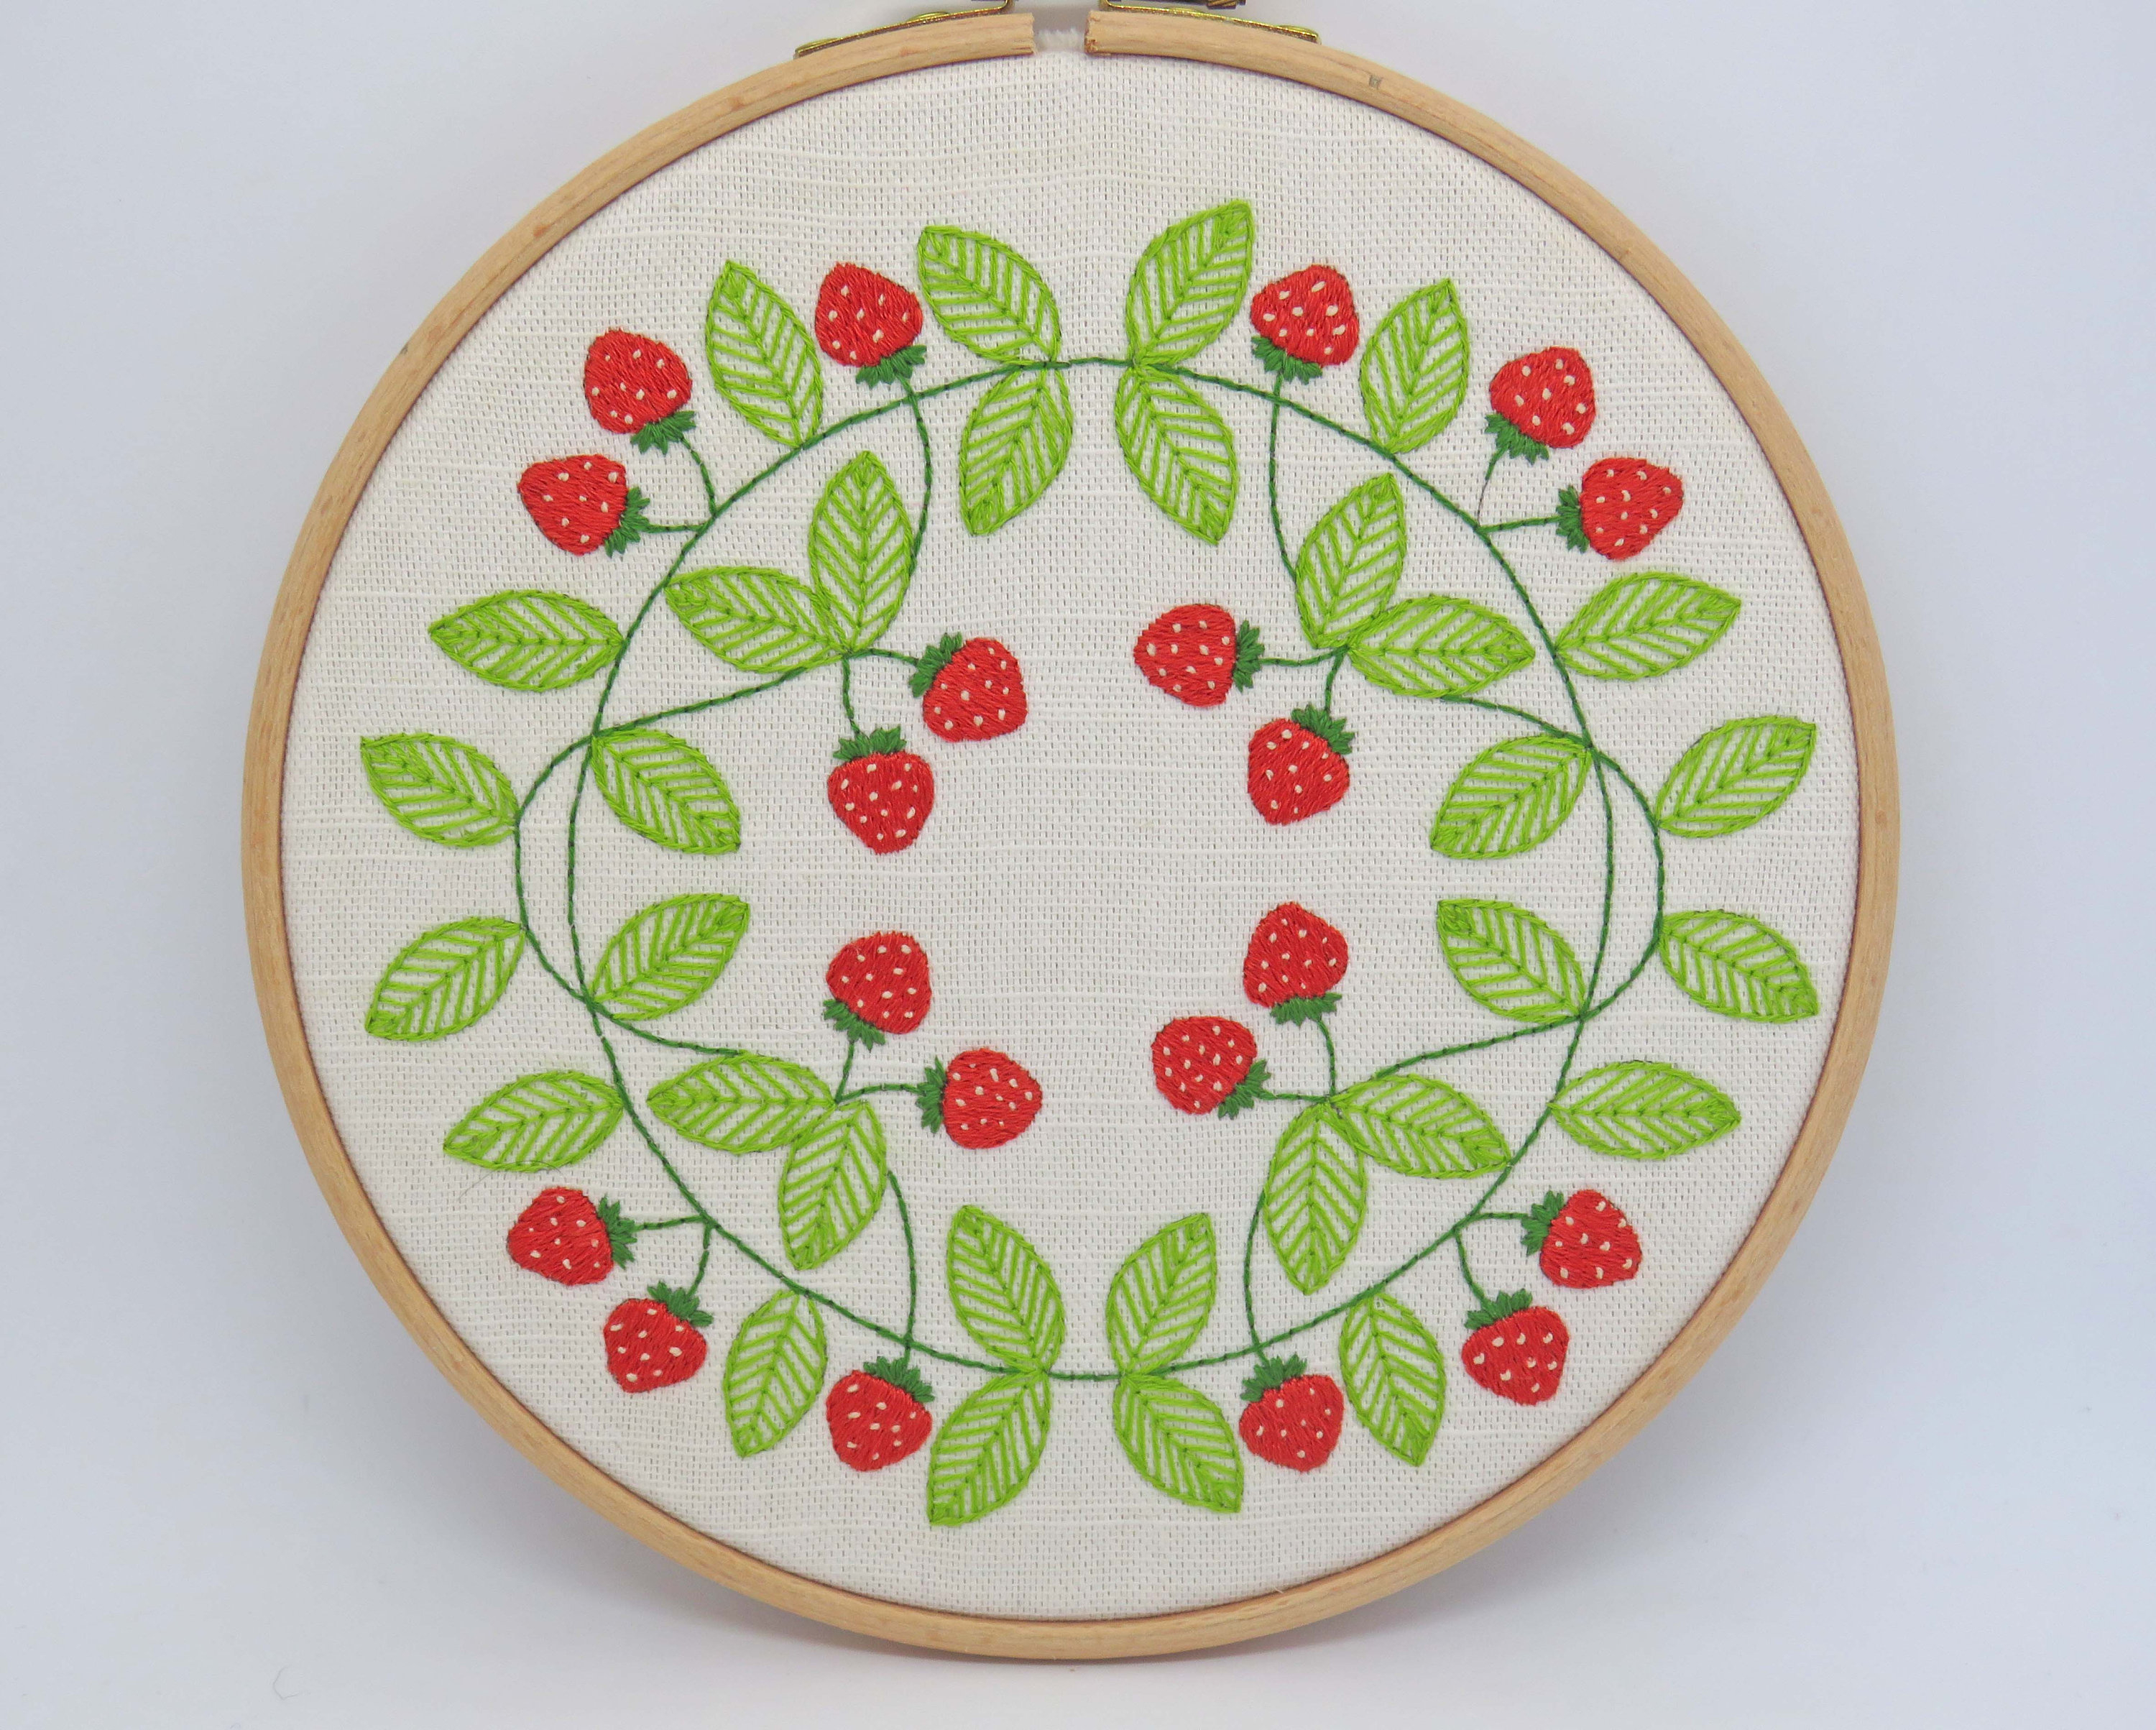 Strawberry Embroidery Pattern Hand Embroidery Pattern Hand Embroidered Strawberries Embroidery Pattern Pdf Beginner Embroidery Pattern Embroidery Hoop Art